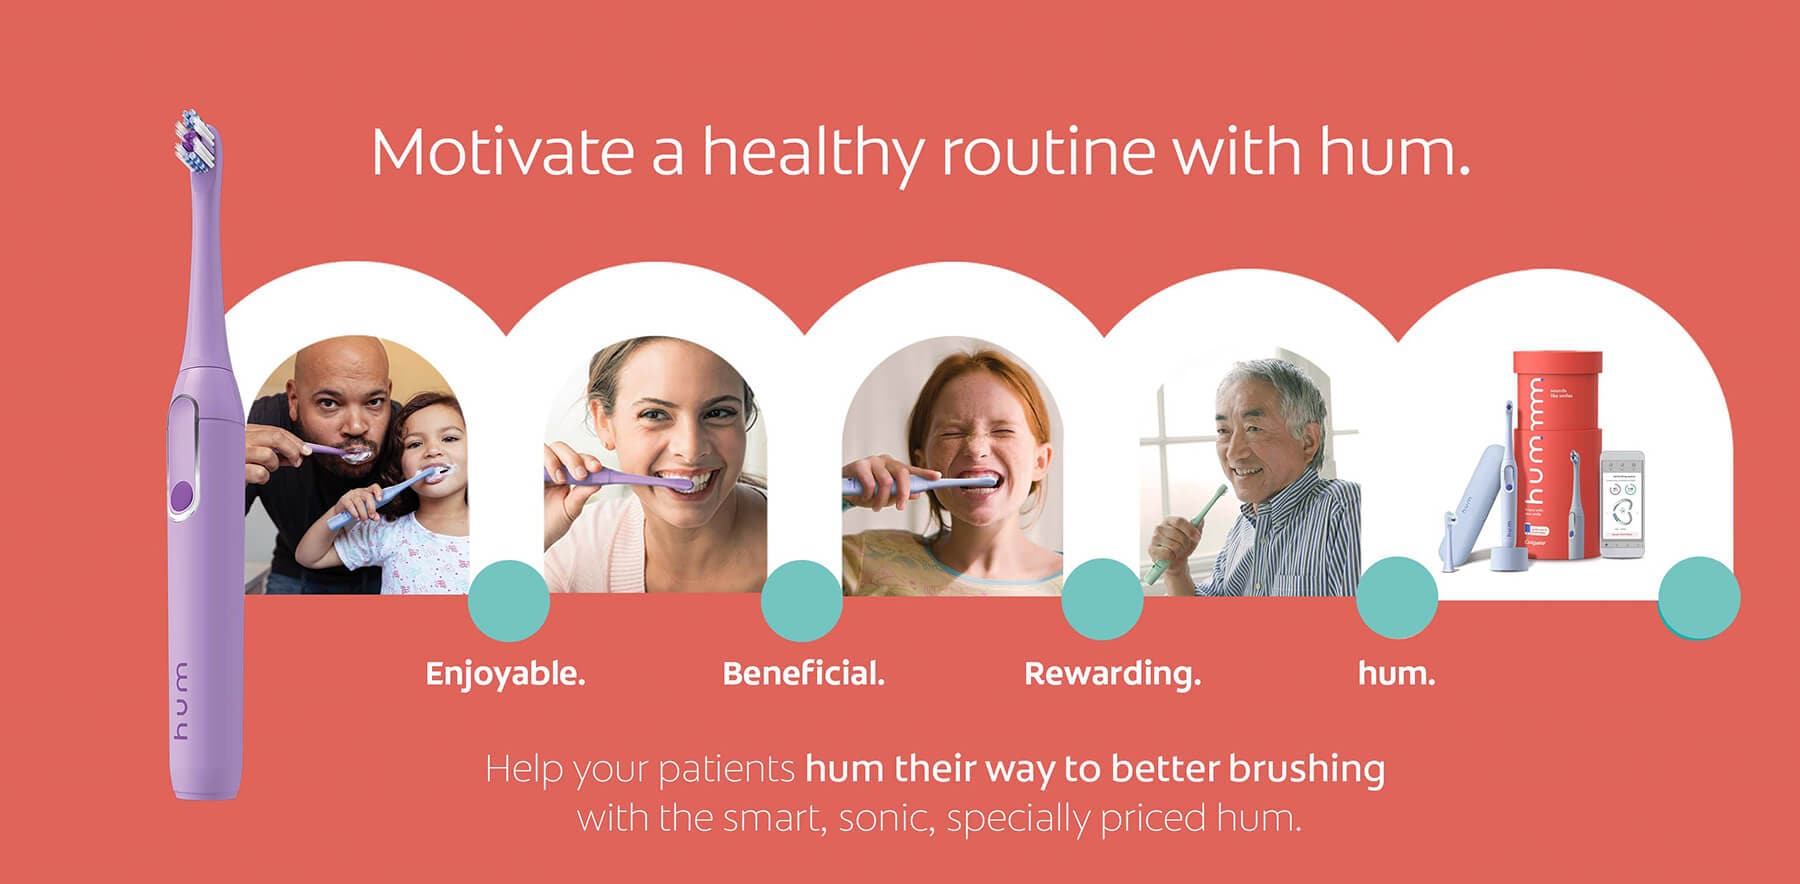 Motivate a healthy routine with hum